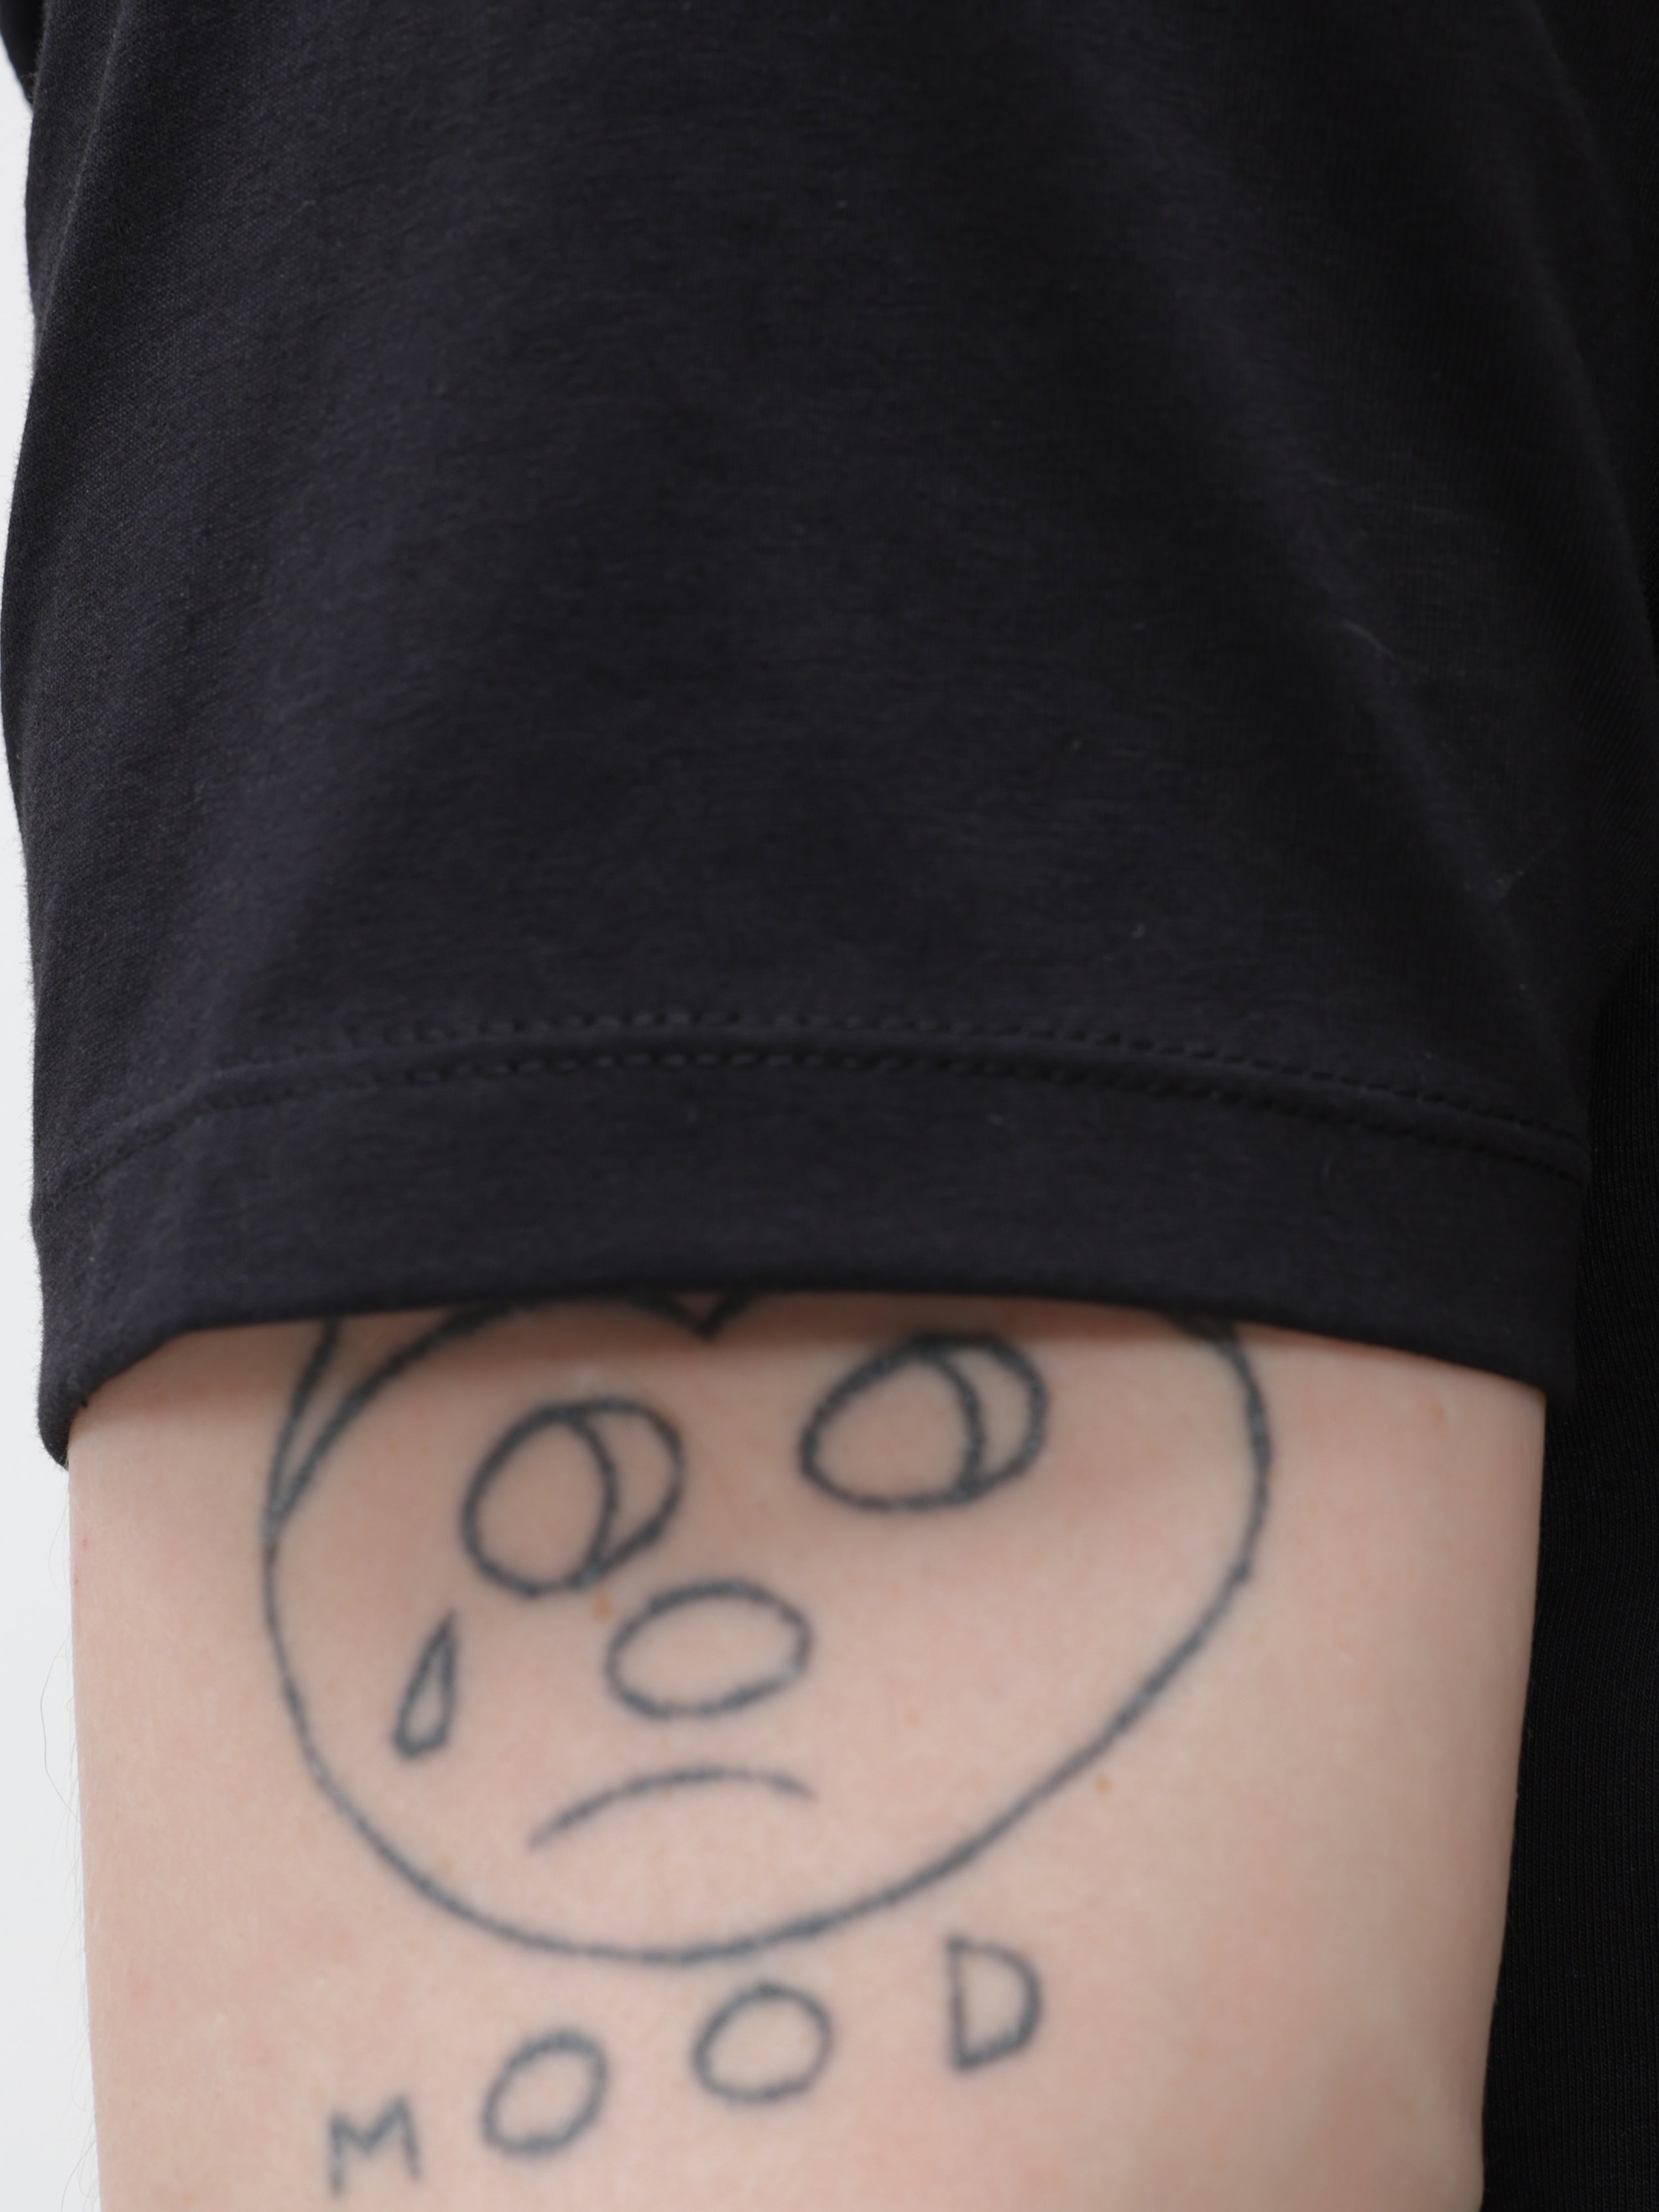 Close-up of arm wearing a black round-neck t-shirt with a "Mood" tattoo featuring a sad face.